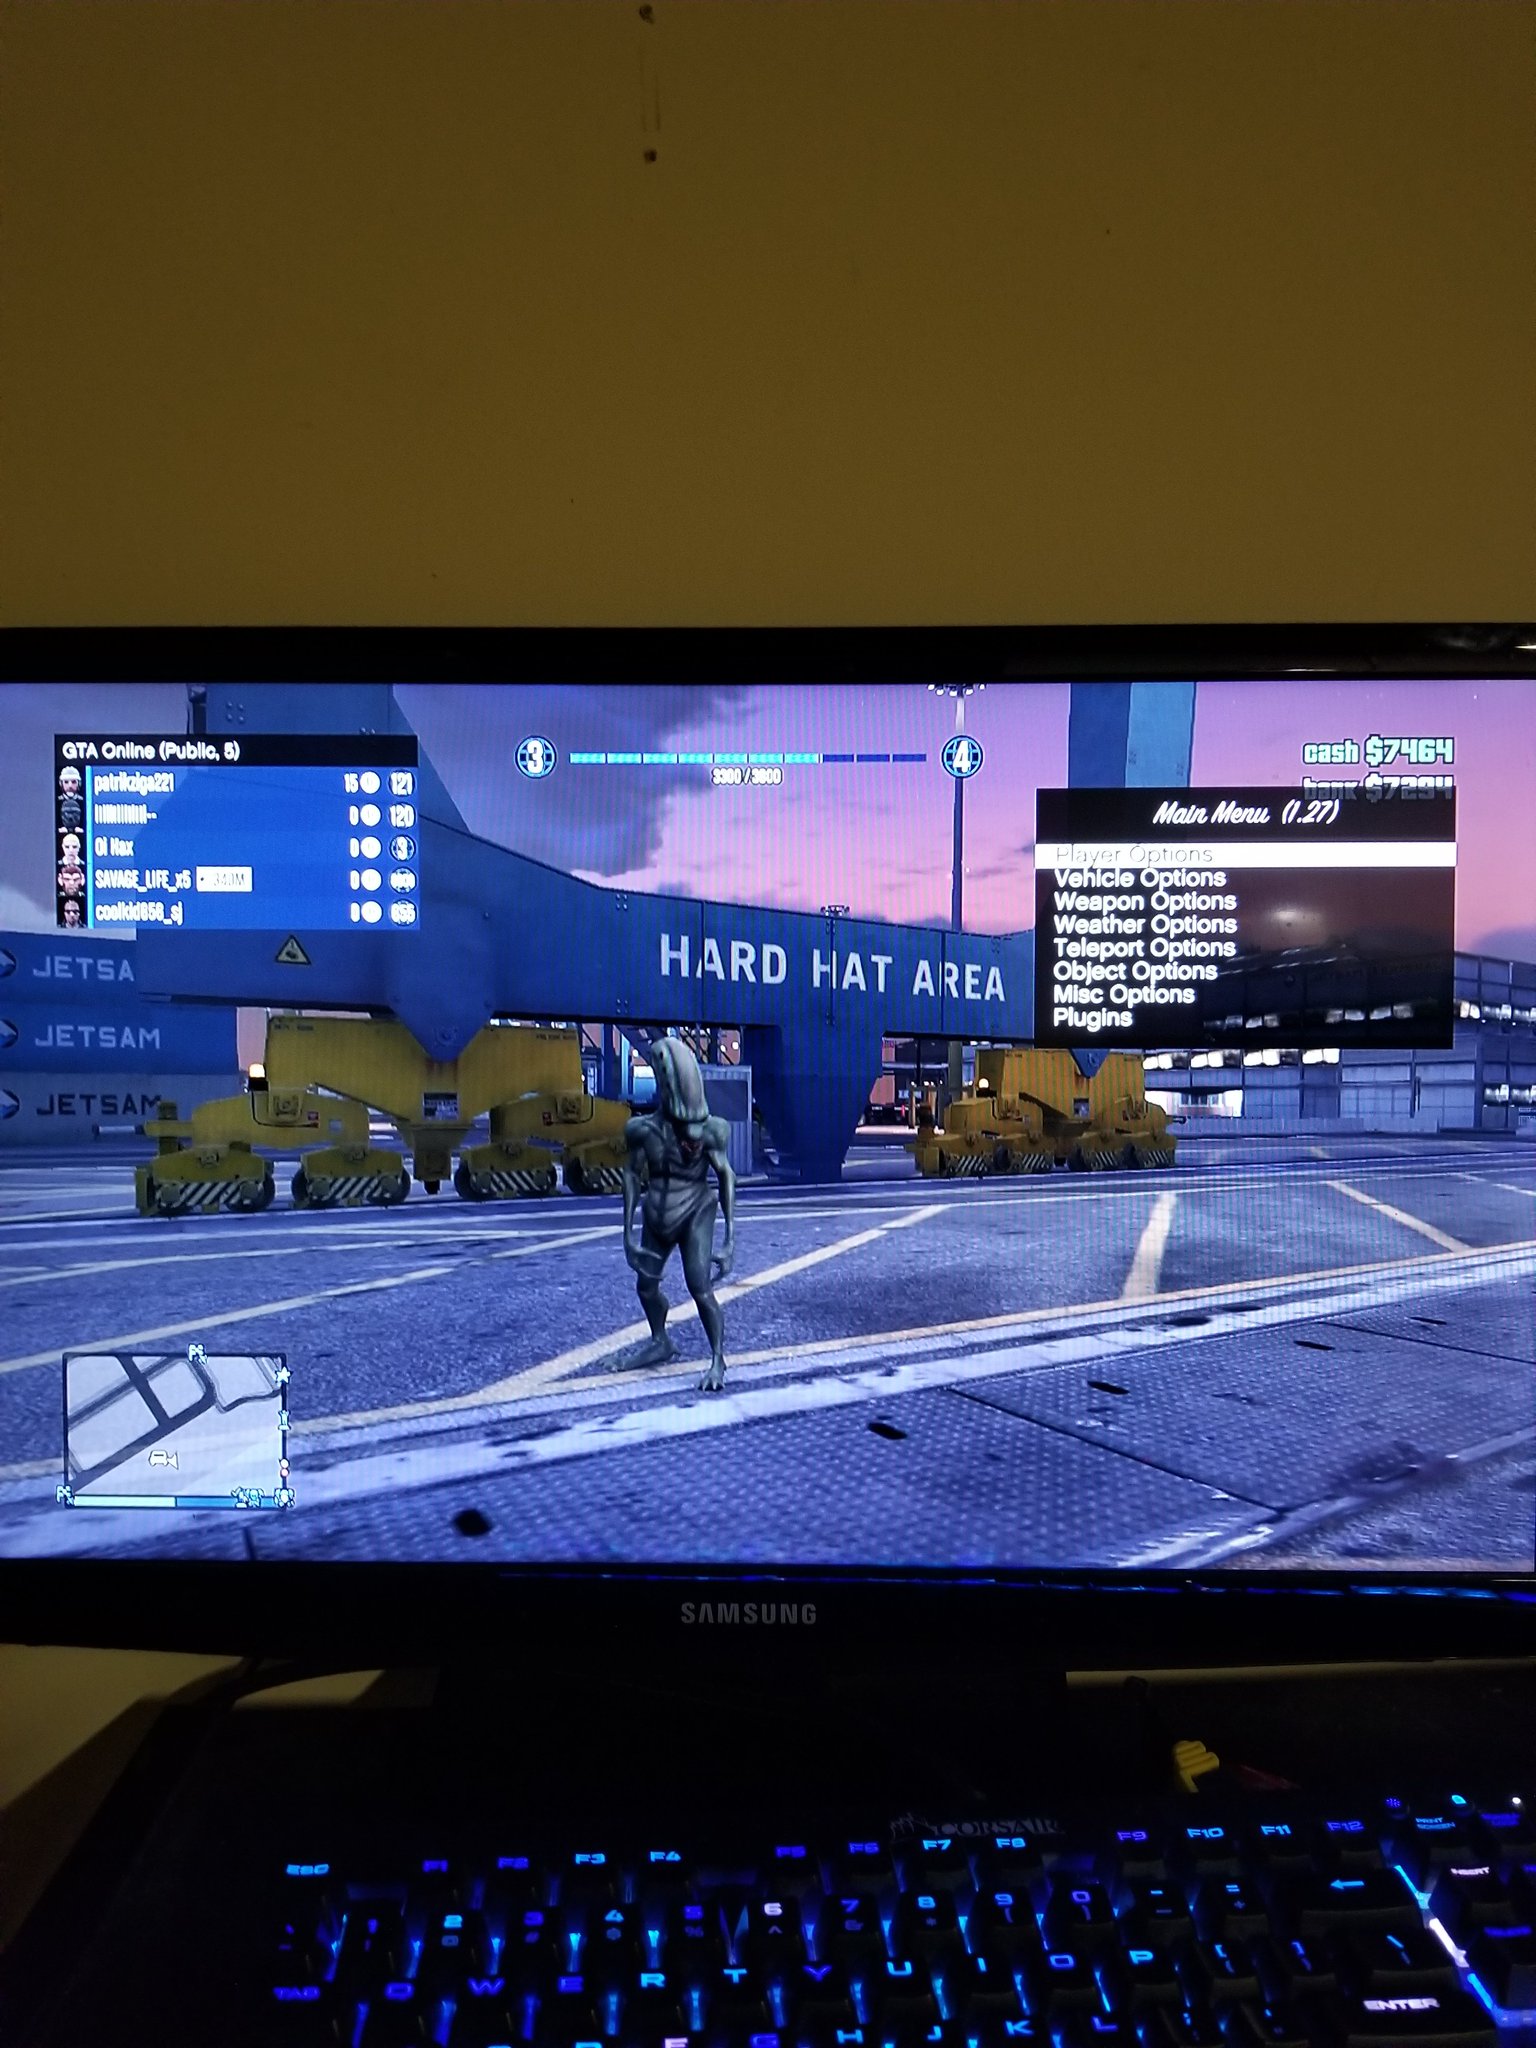 Schuine streep Populair Kalmte gøprø_2027 on Twitter: "GTA V mod menu running on OFW PS3 super slim  (official firmware, not modded or jailbroken or tampered in any way) via  remote memory read/write/RCE exploit I wrote. Video